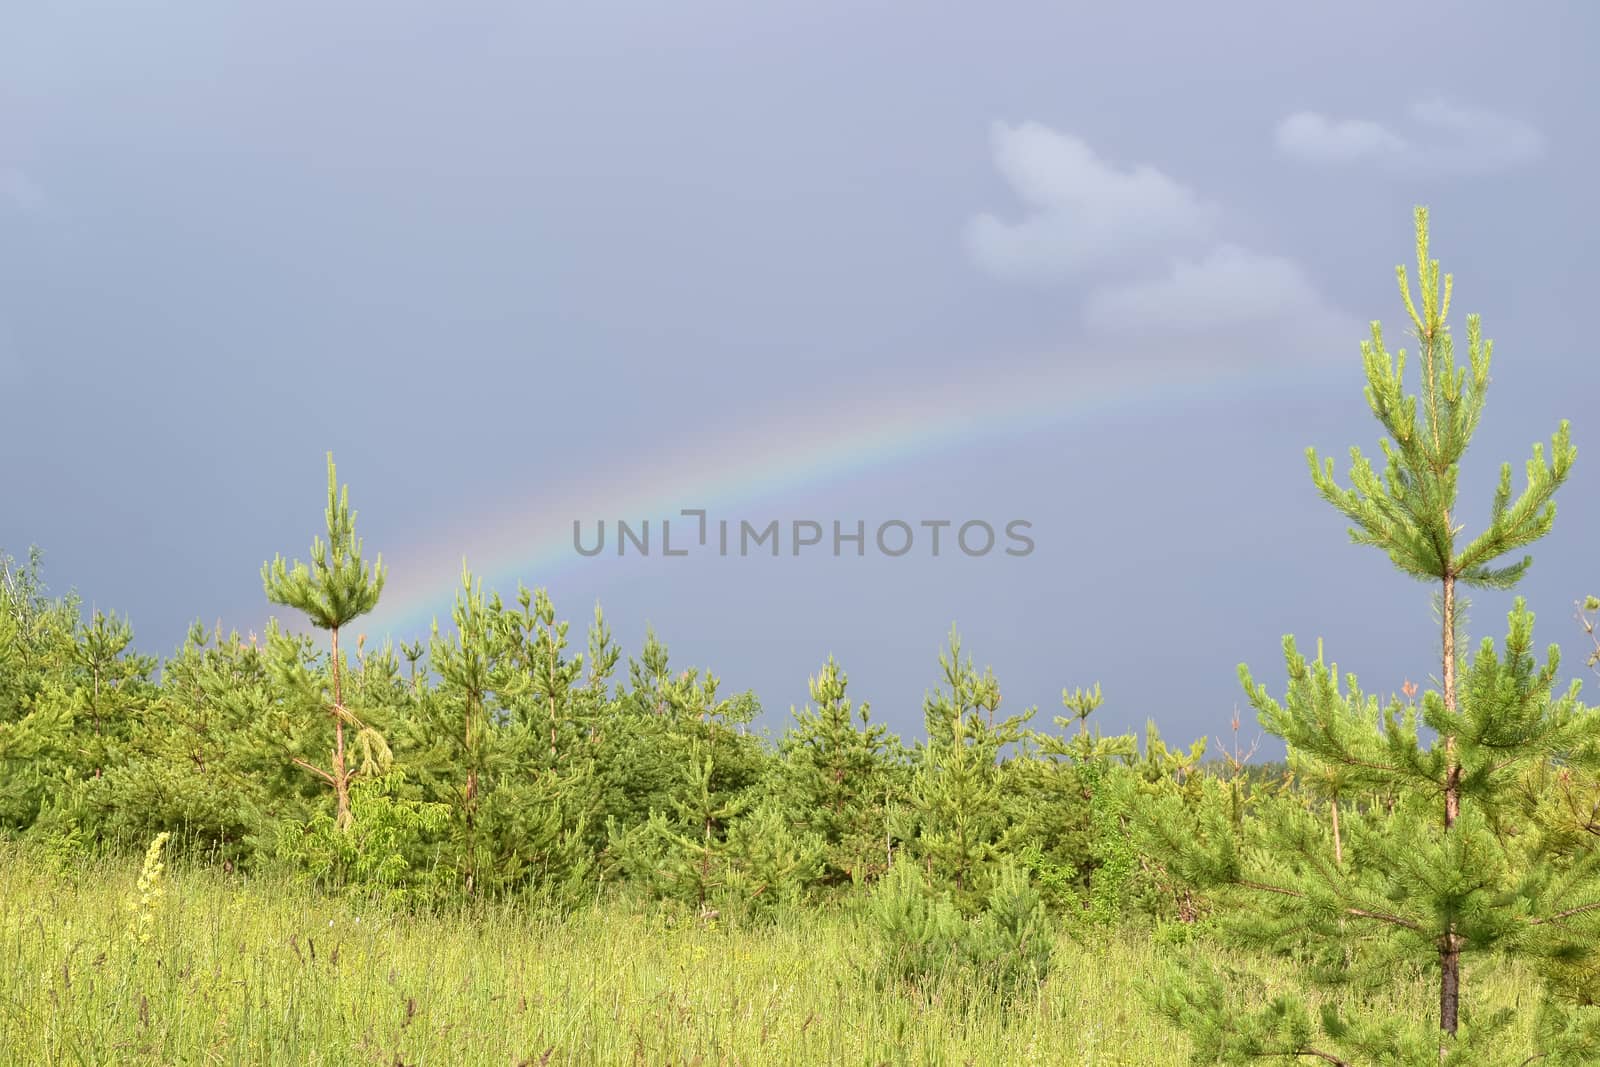 Landscape with rainbow in dark sky over the young pine forest, lit by sunlight.